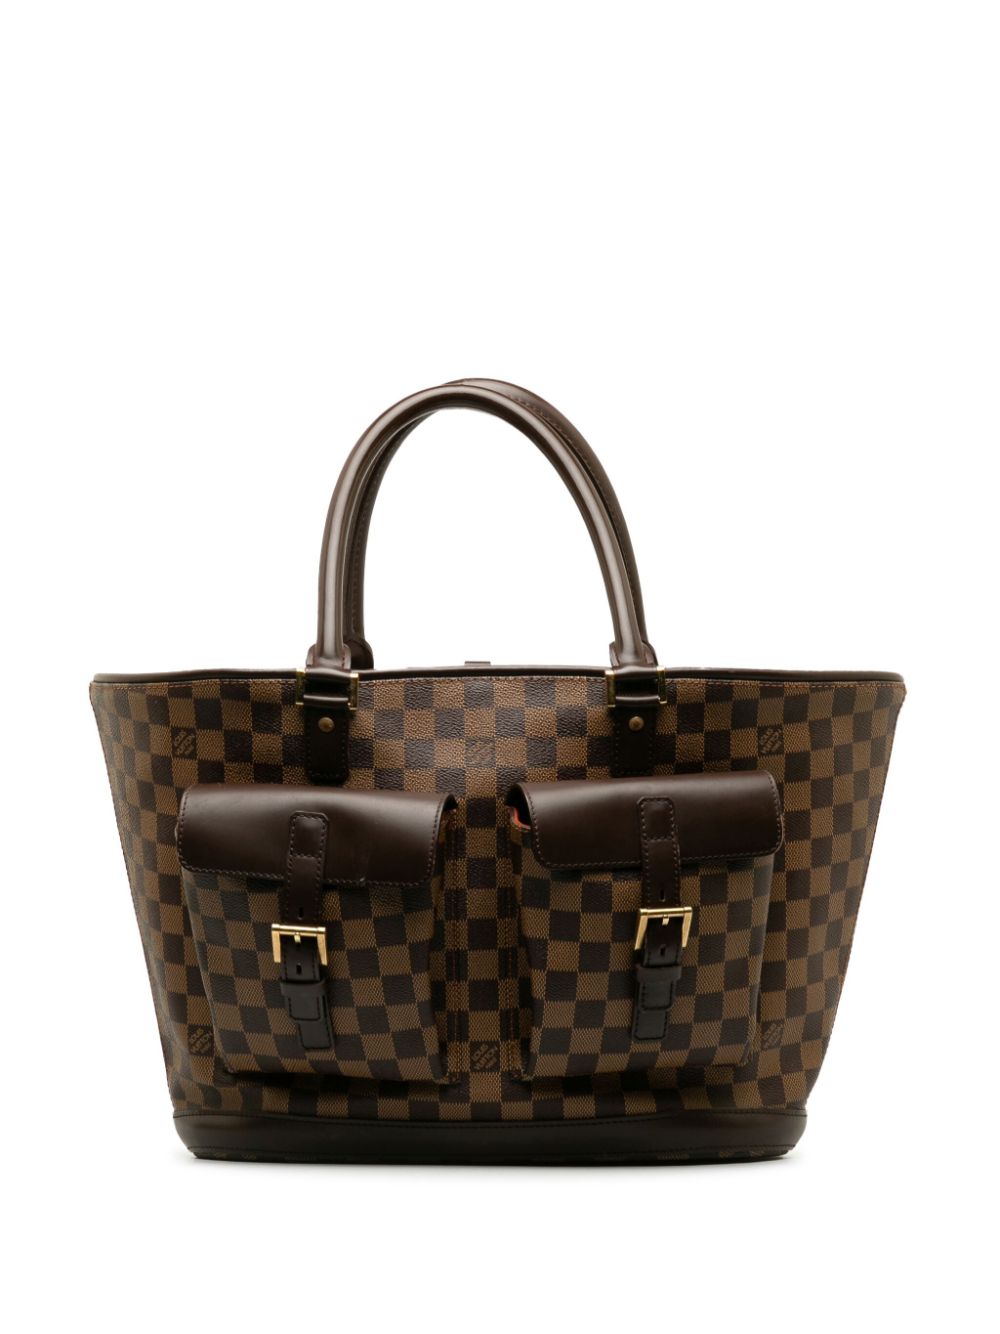 Pre-owned Louis Vuitton Manosque Gm 托特包（2005年典藏款） In Brown